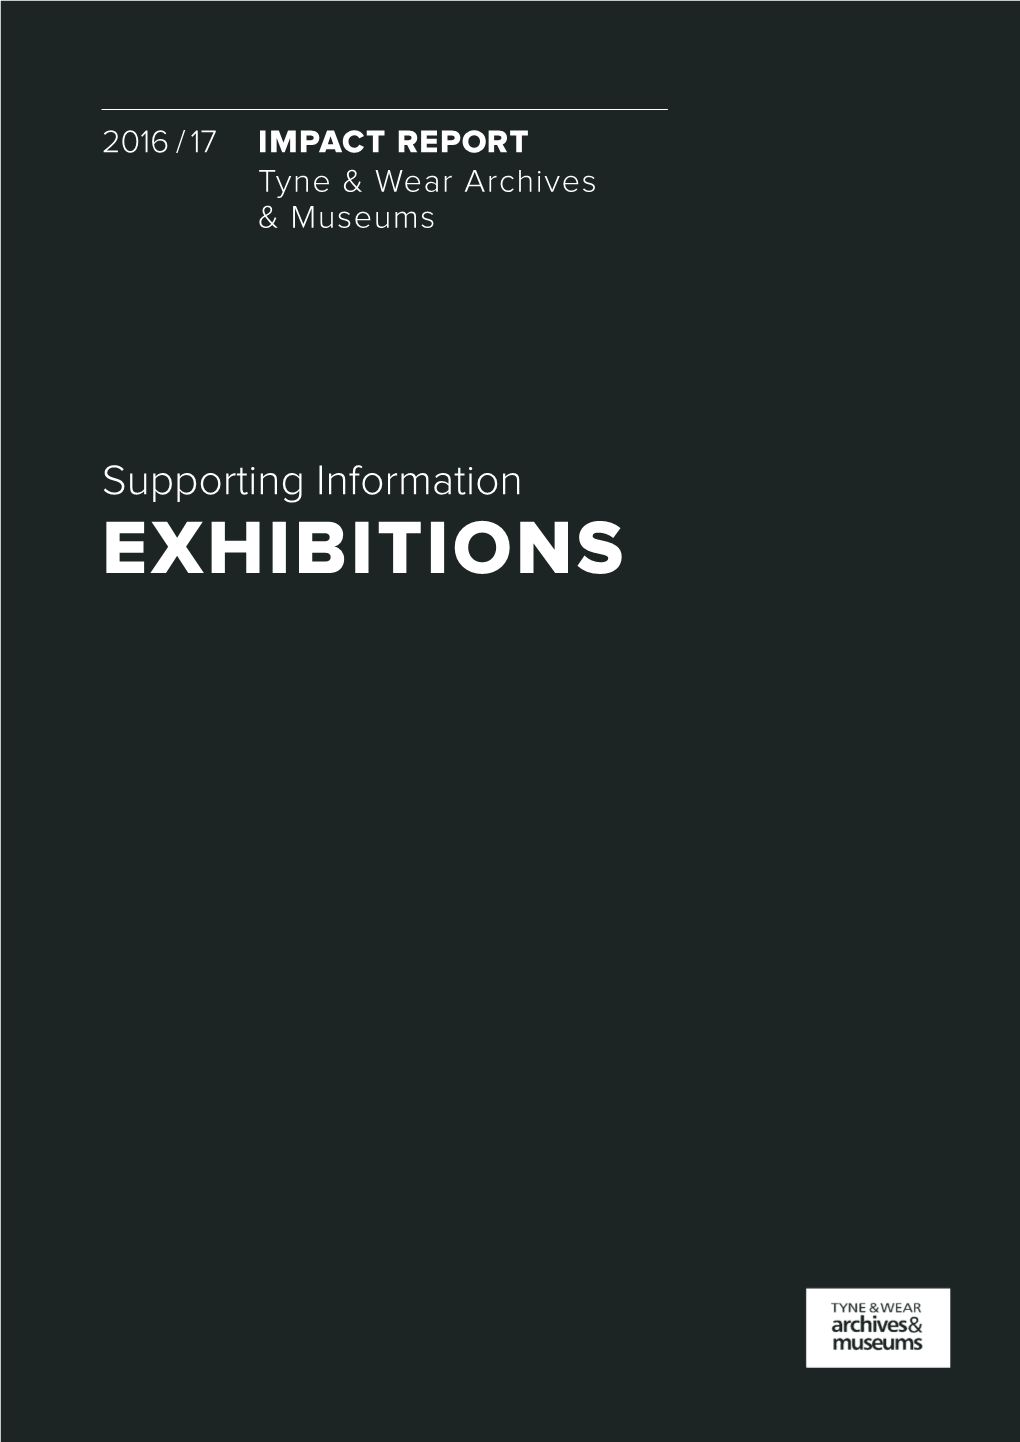 EXHIBITIONS 2 Impact Report 2016/17 Supporting Information / Exhibitions Tyne & Wear Archives & Museums Supporting Information / Exhibitions 3